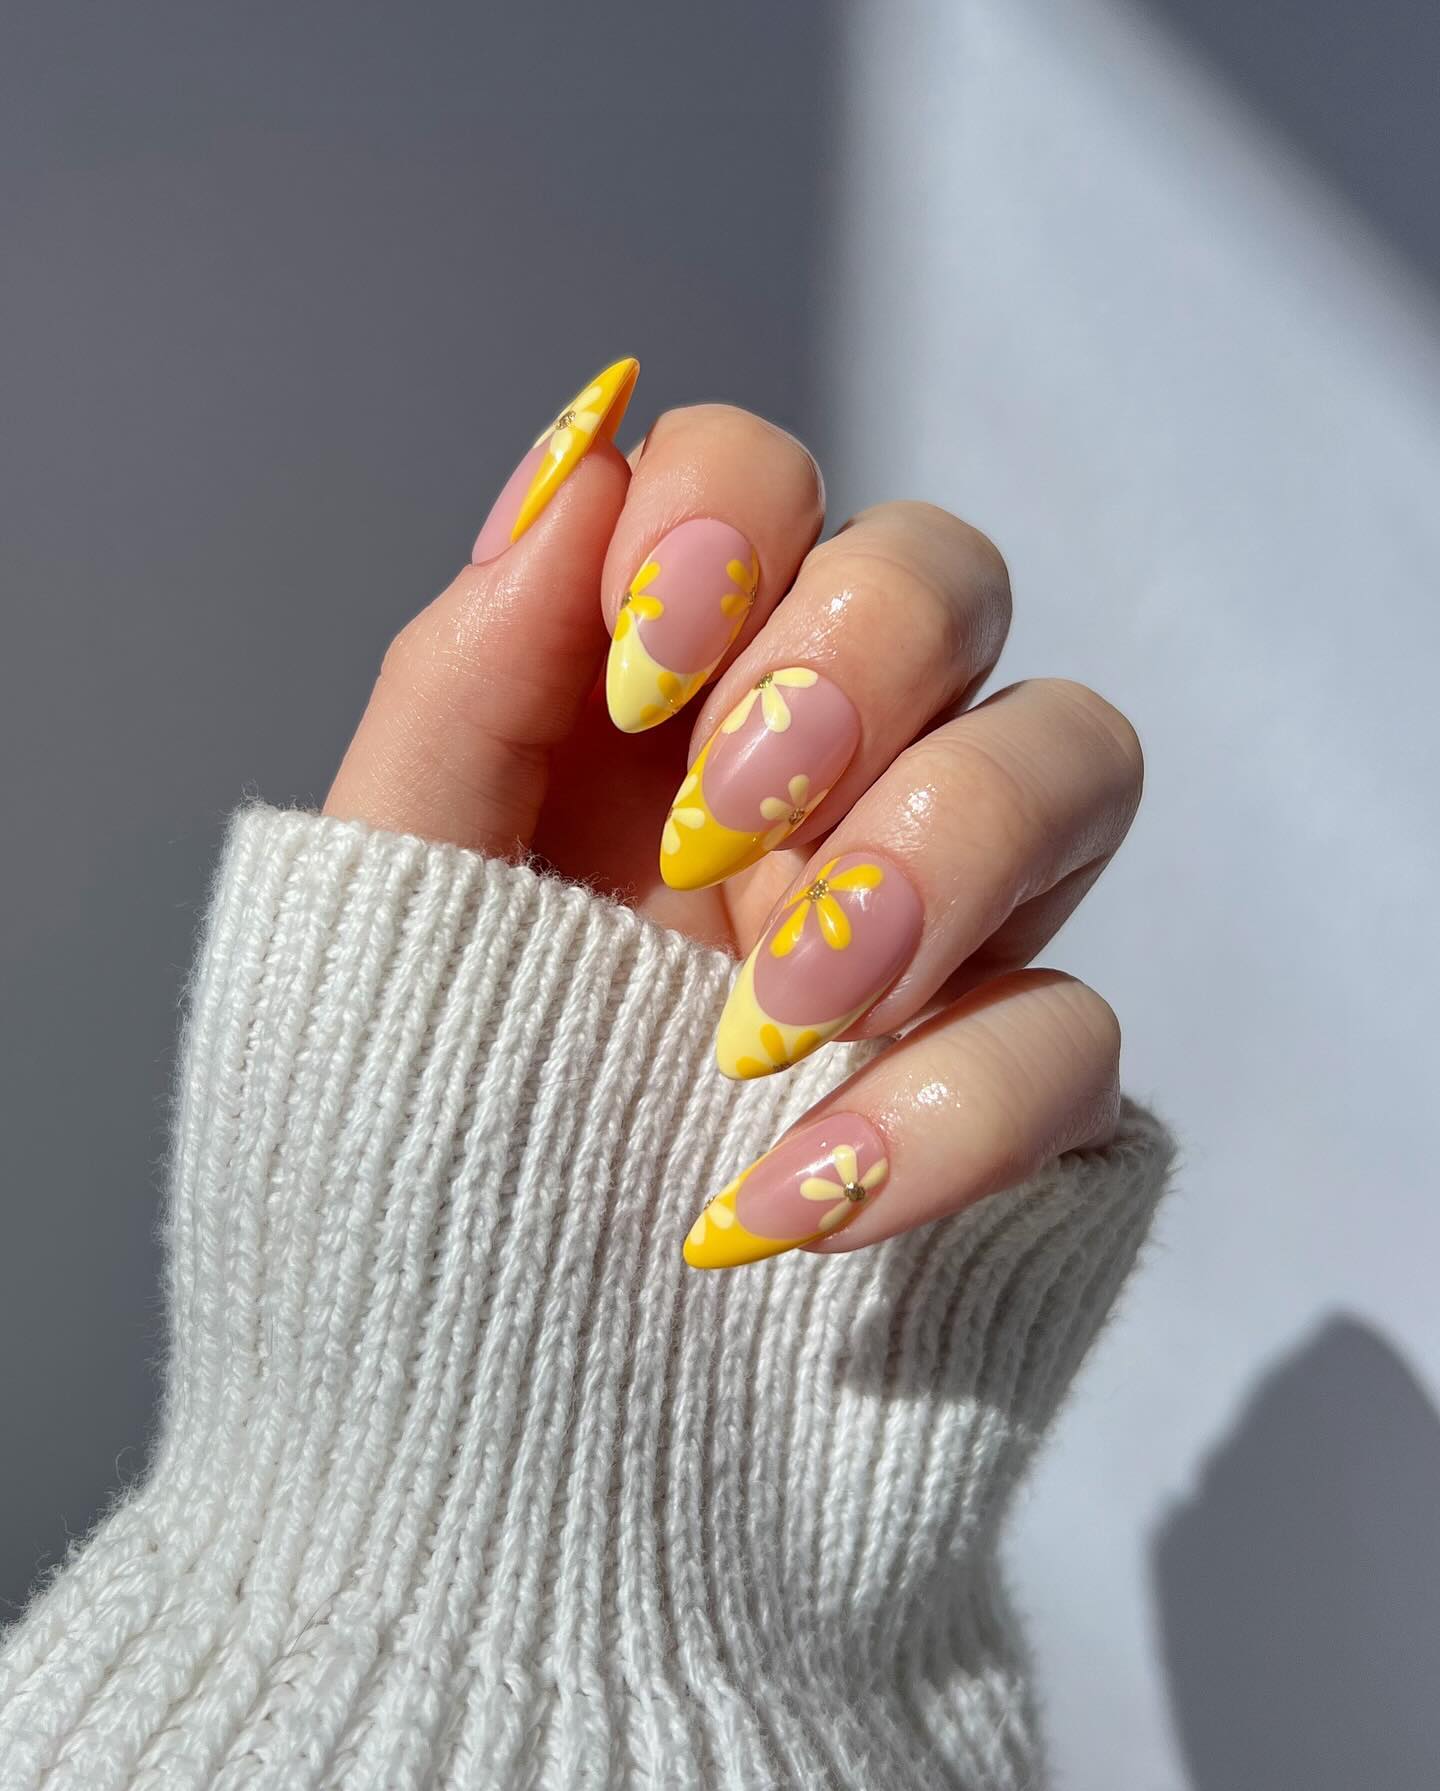 100+ Short Nail Designs You’ll Want To Try This Year images 101